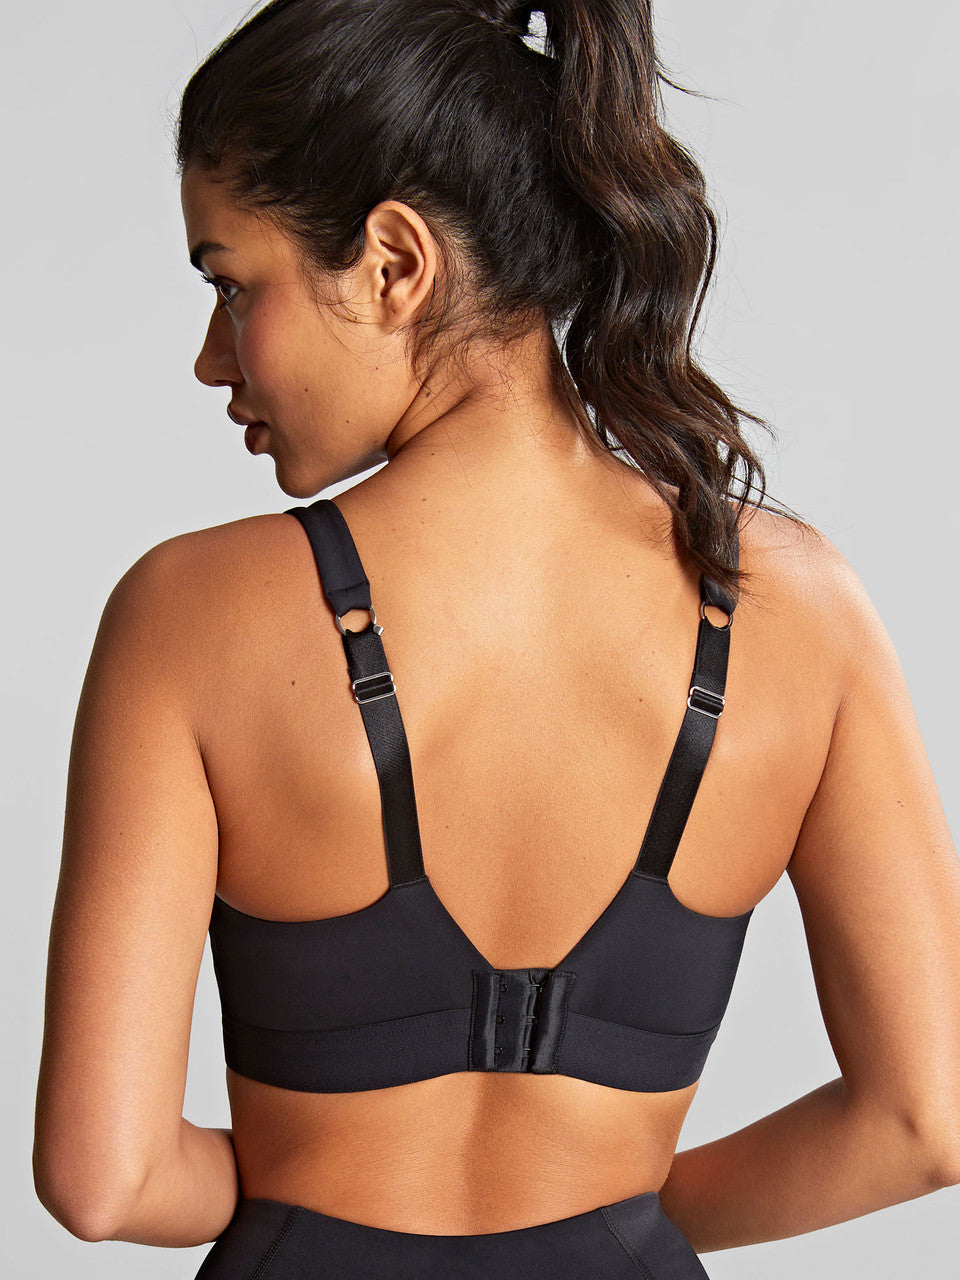 Ultra Perform Non-Padded Wired Sports Bra - Black worn by model back view